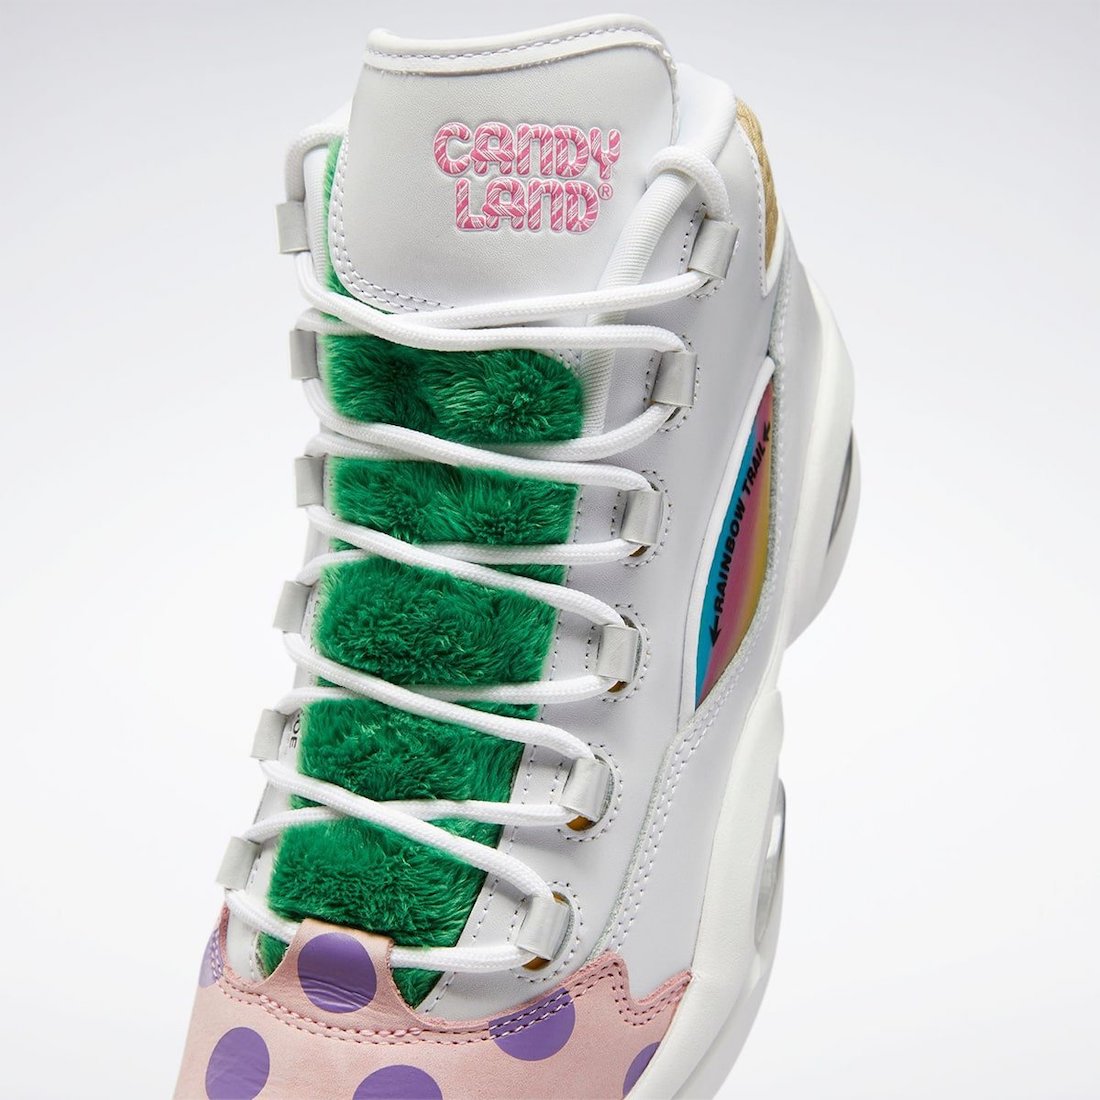 Reebok Question Mid Candy Land GZ8826 Release Date